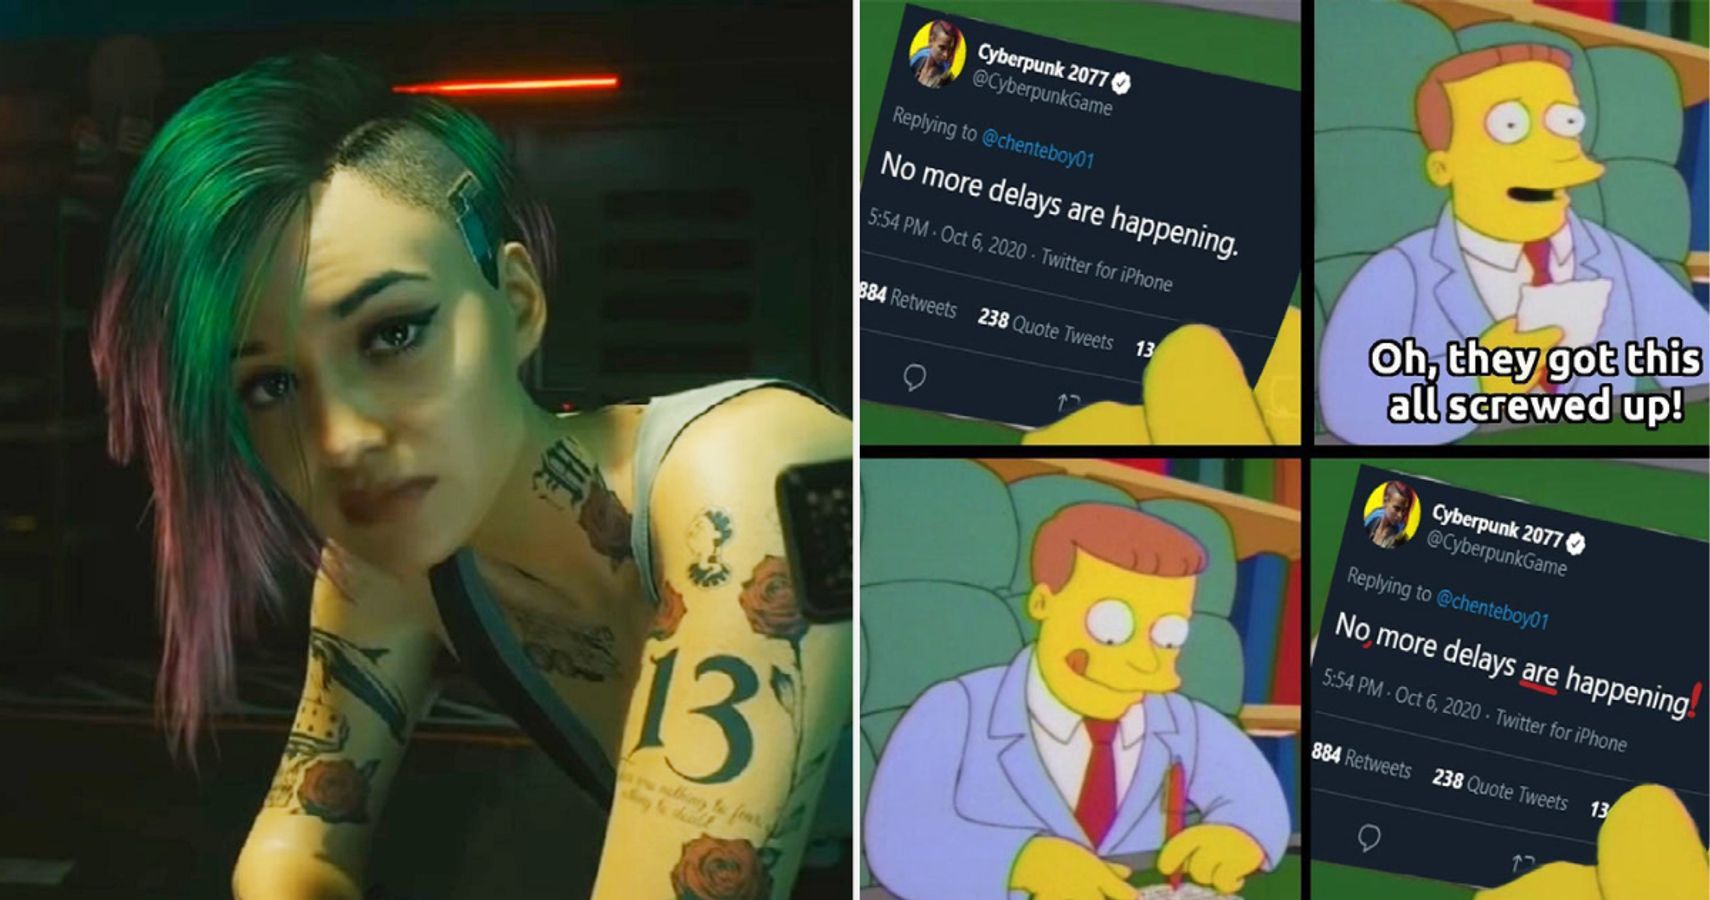 10 Cyberpunk 2077 Delay Memes That Are Too Hilarious For Words